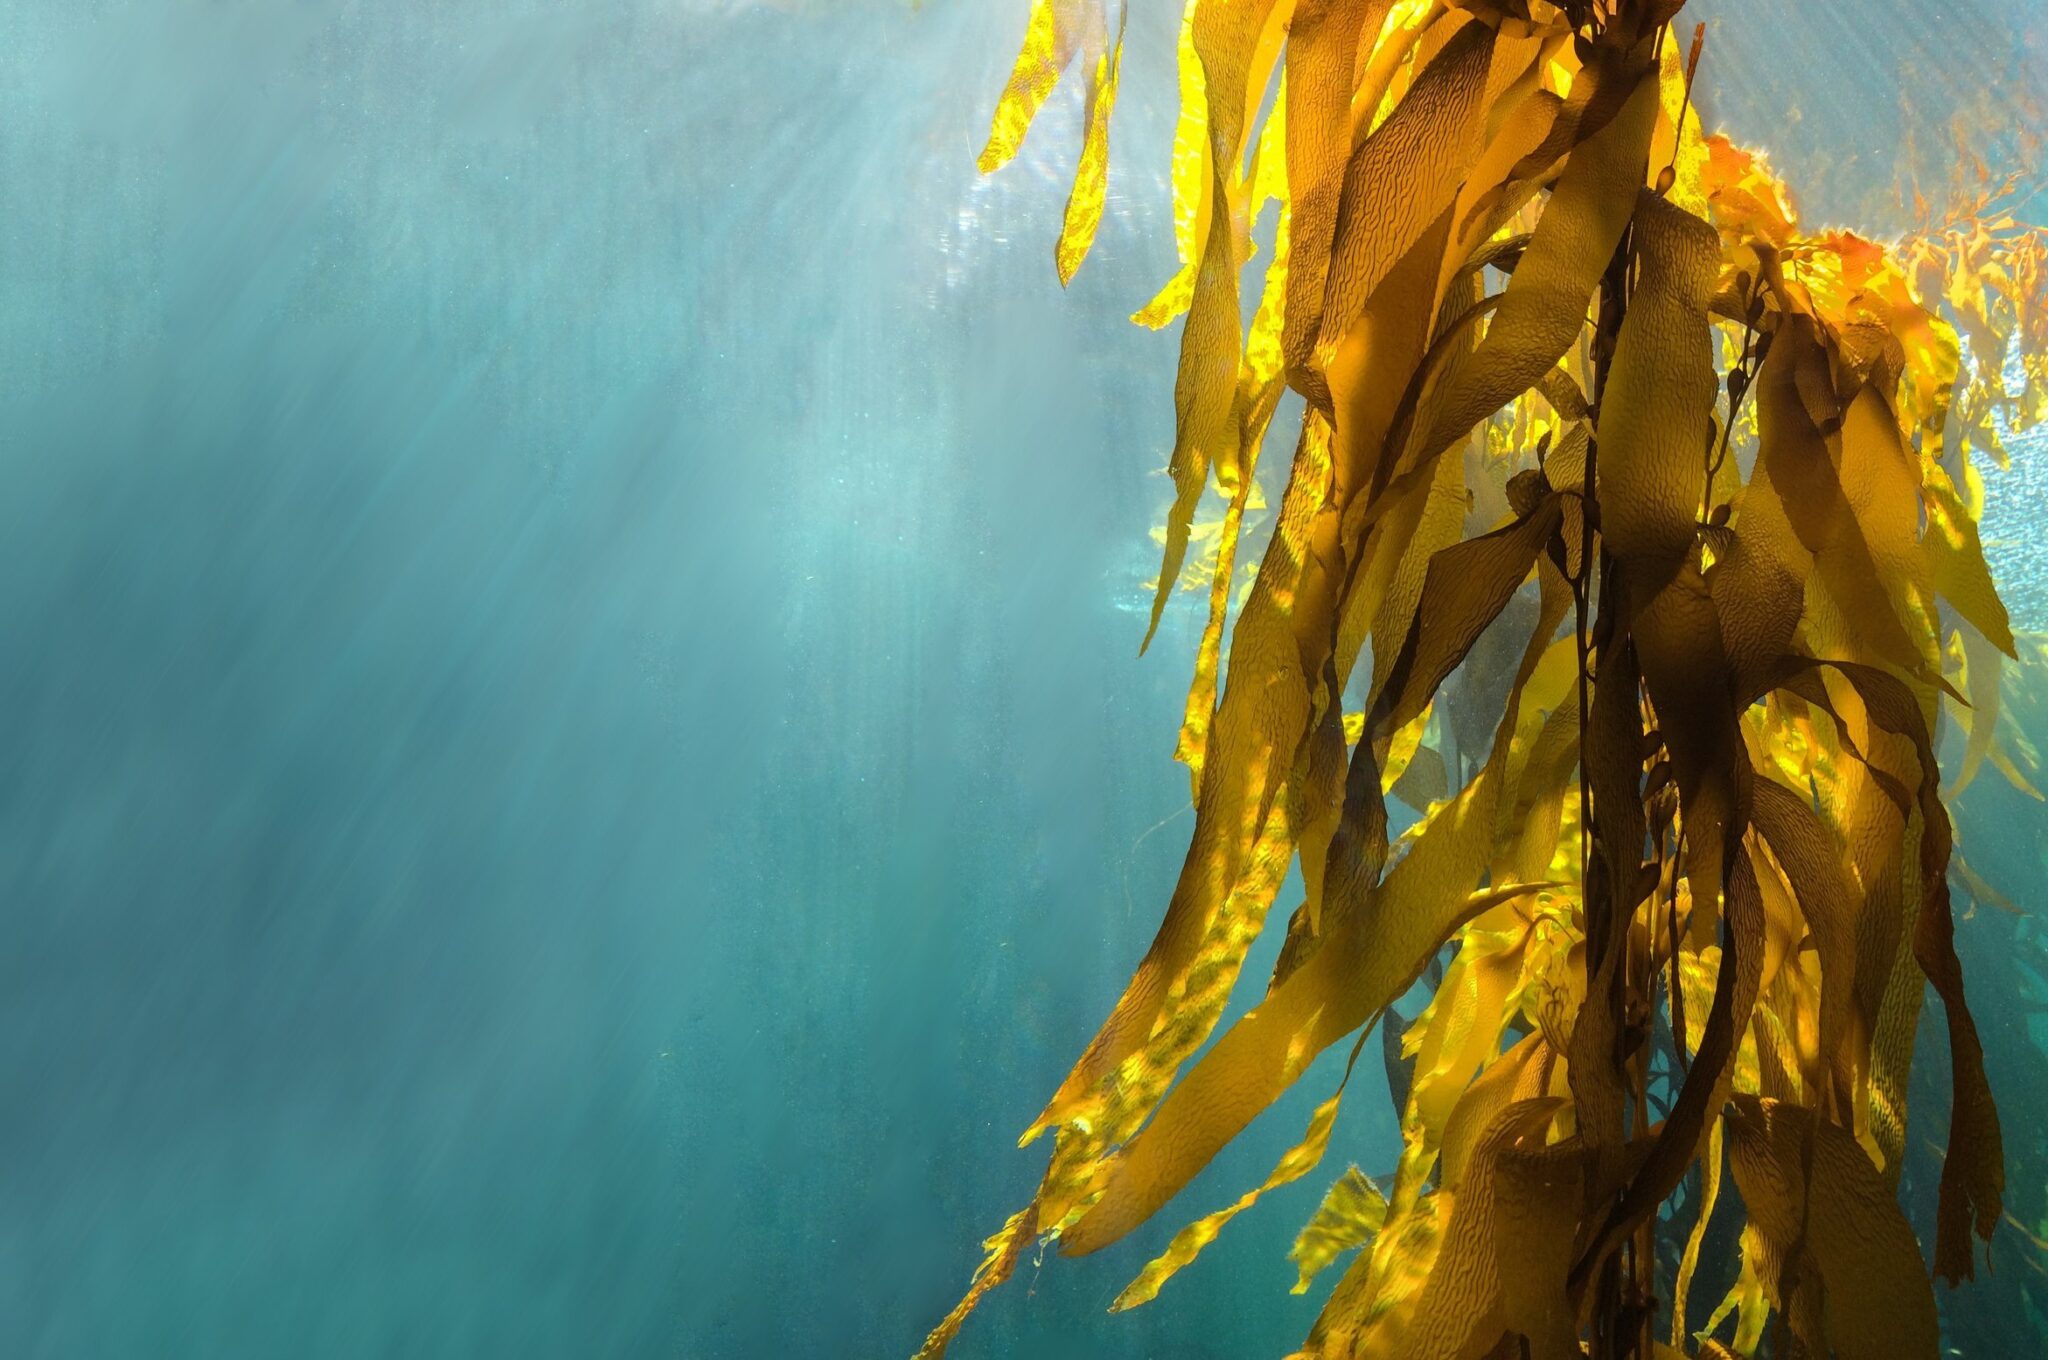 Transforming seaweed into low-carbon chemicals for materials, food, cosmetics and more